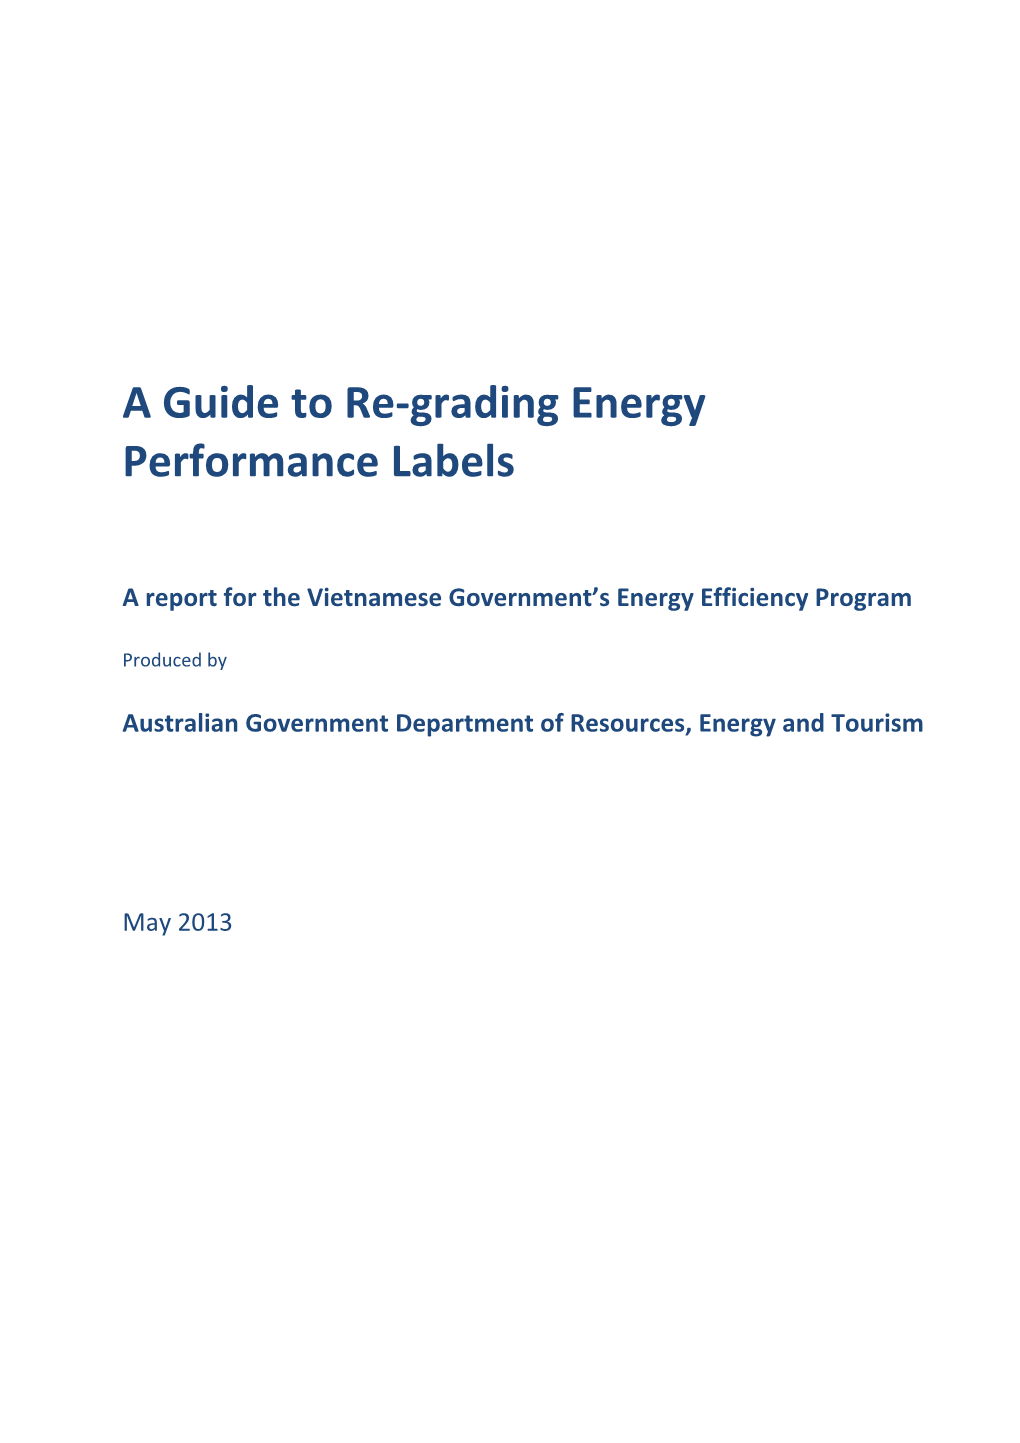 A Guide to Re-Grading Energy Performance Labels